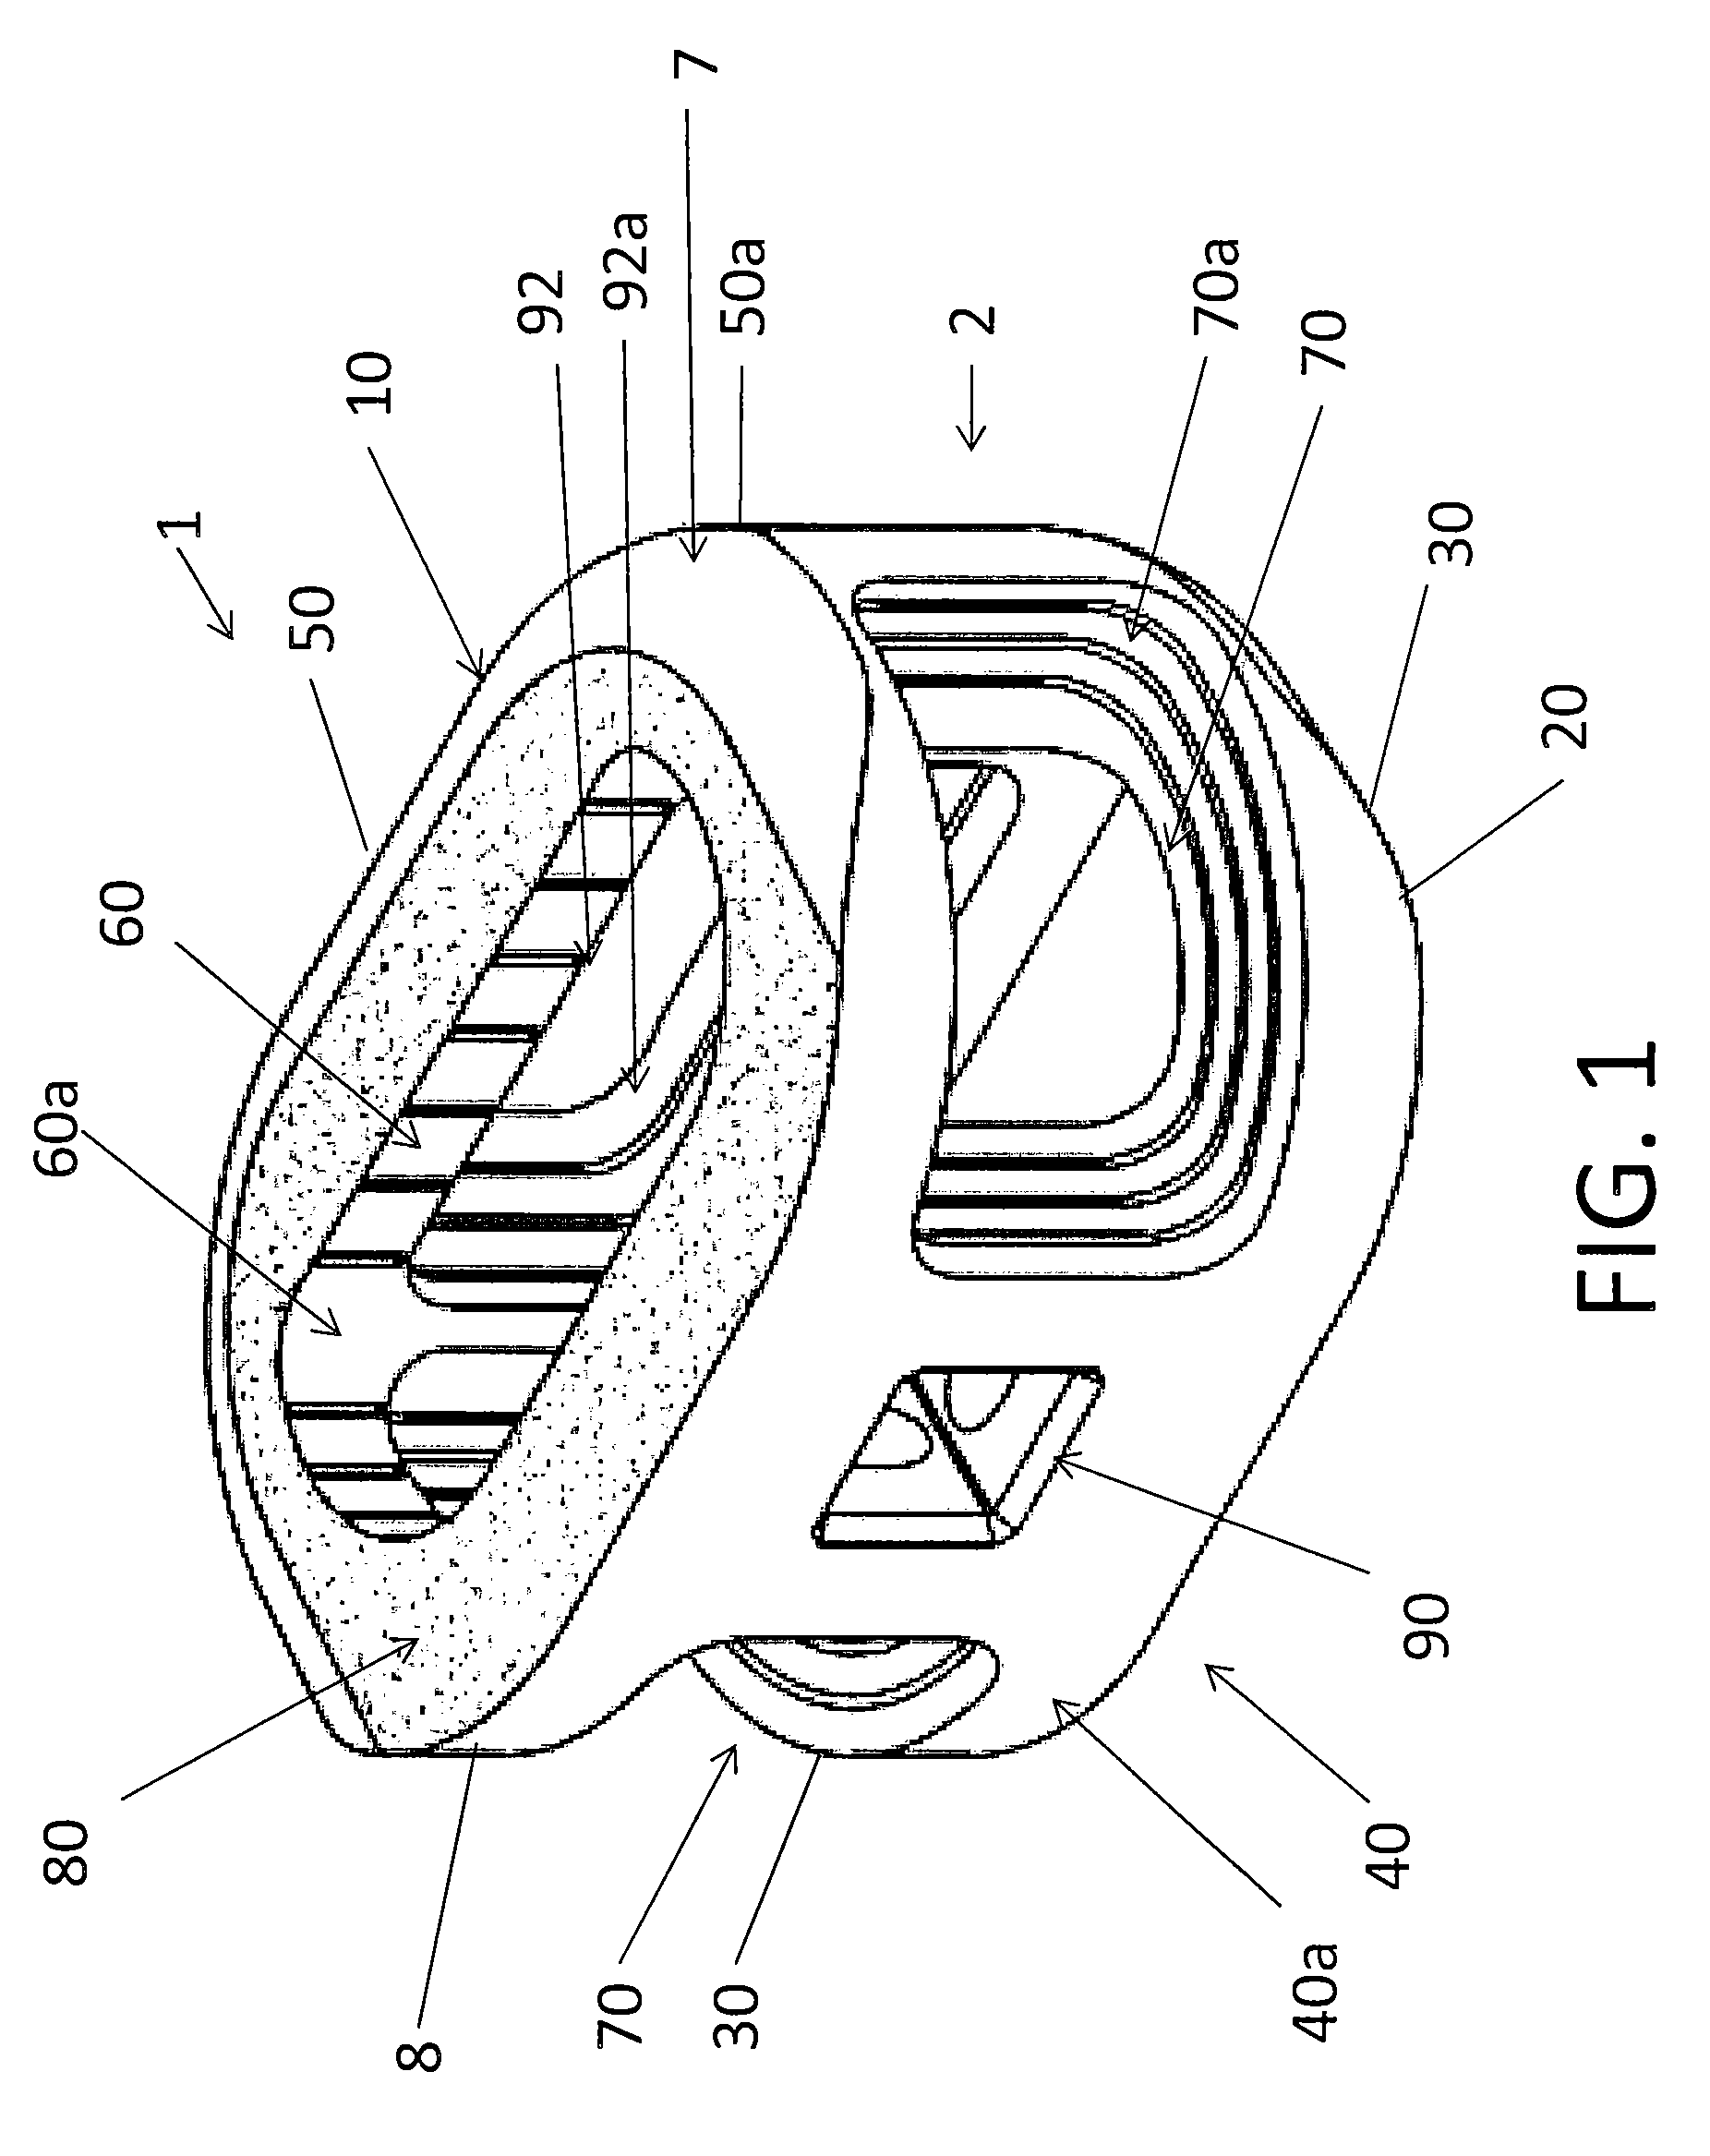 Implants having internal features for graft retention and load transfer between implant and vertebrae